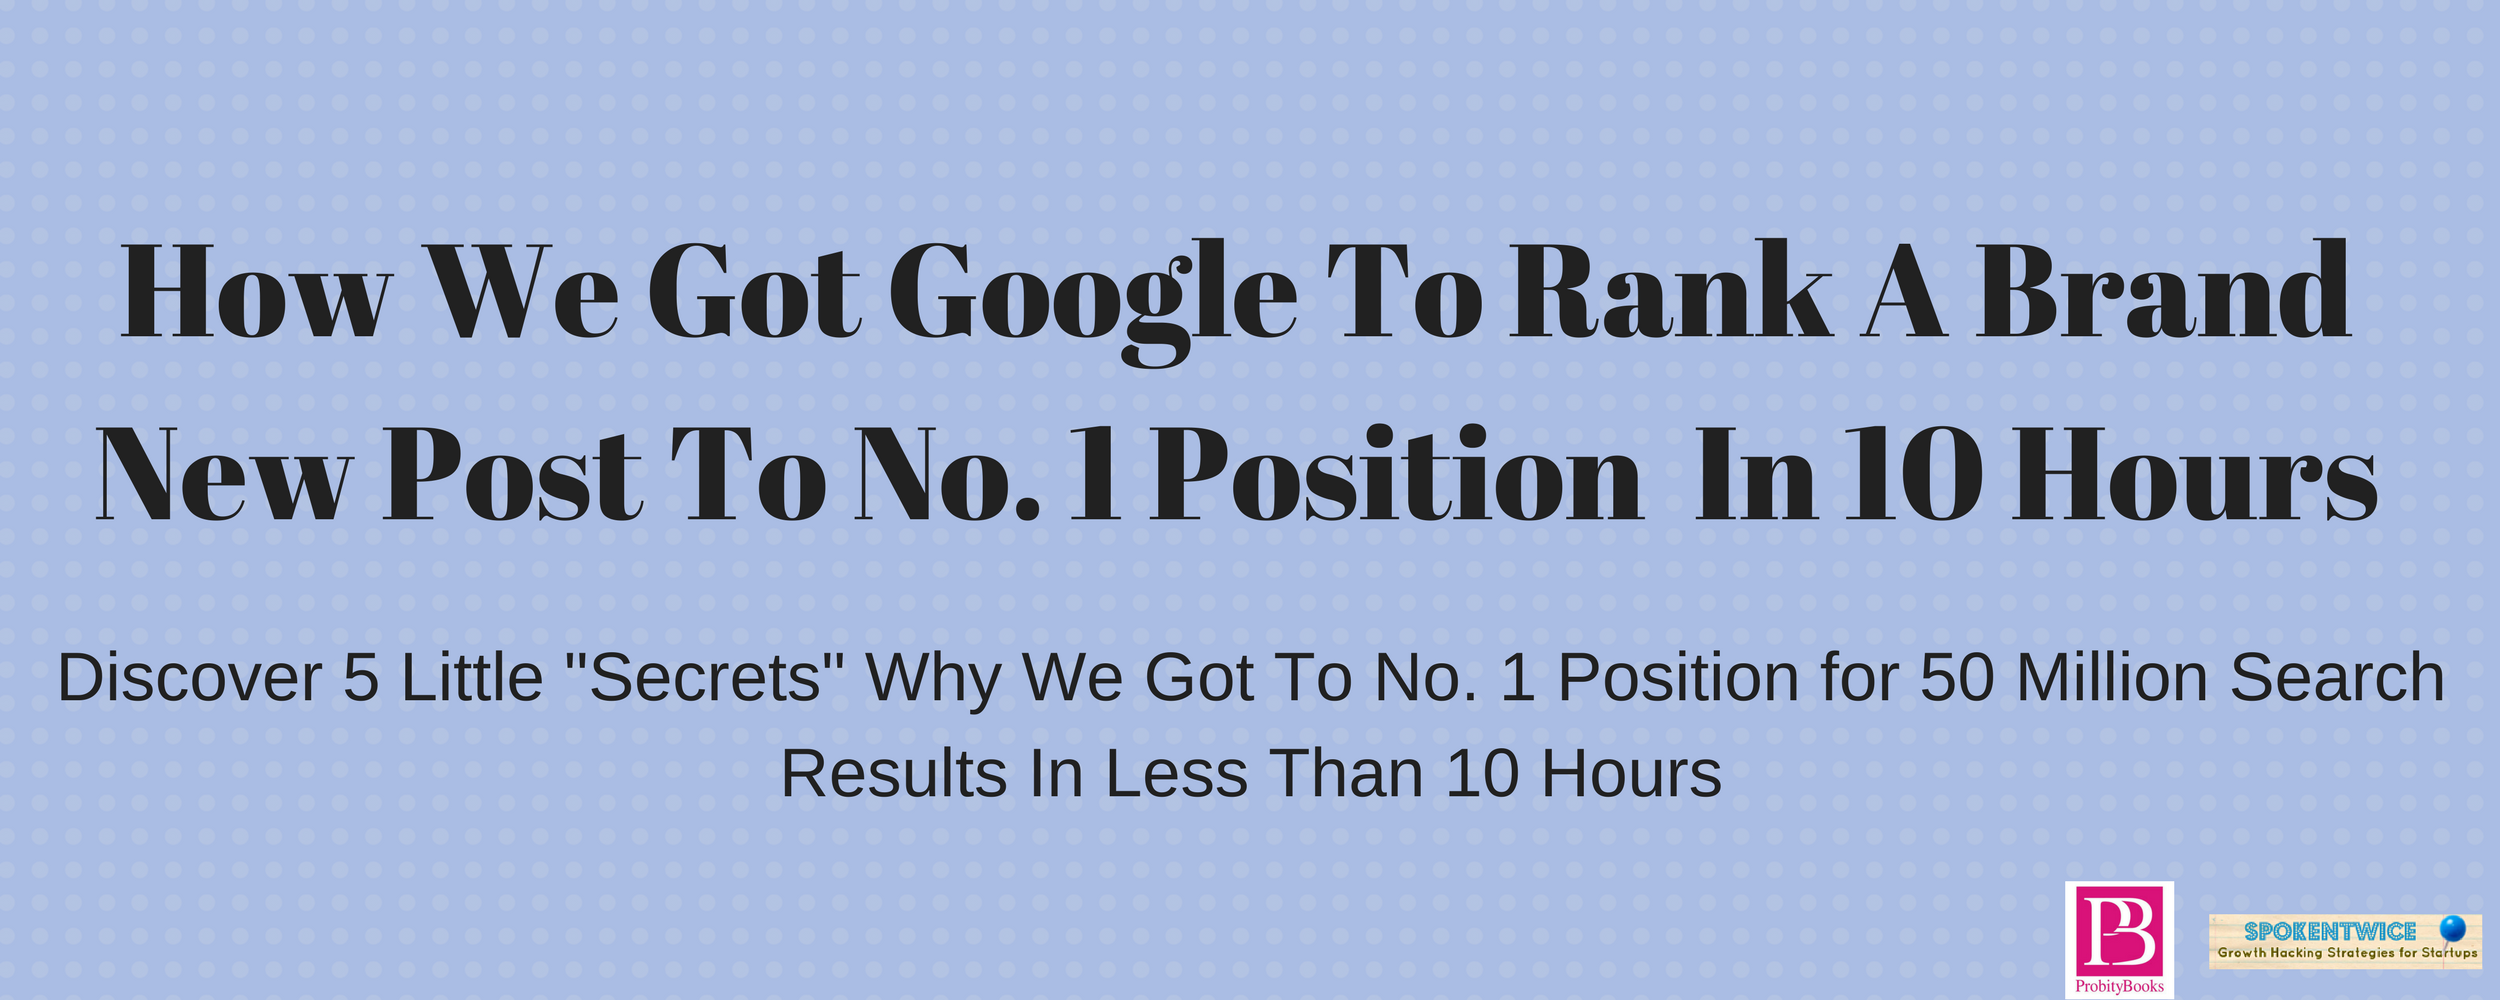 local SEO | how a new post got to 1st page of google in 10 hours